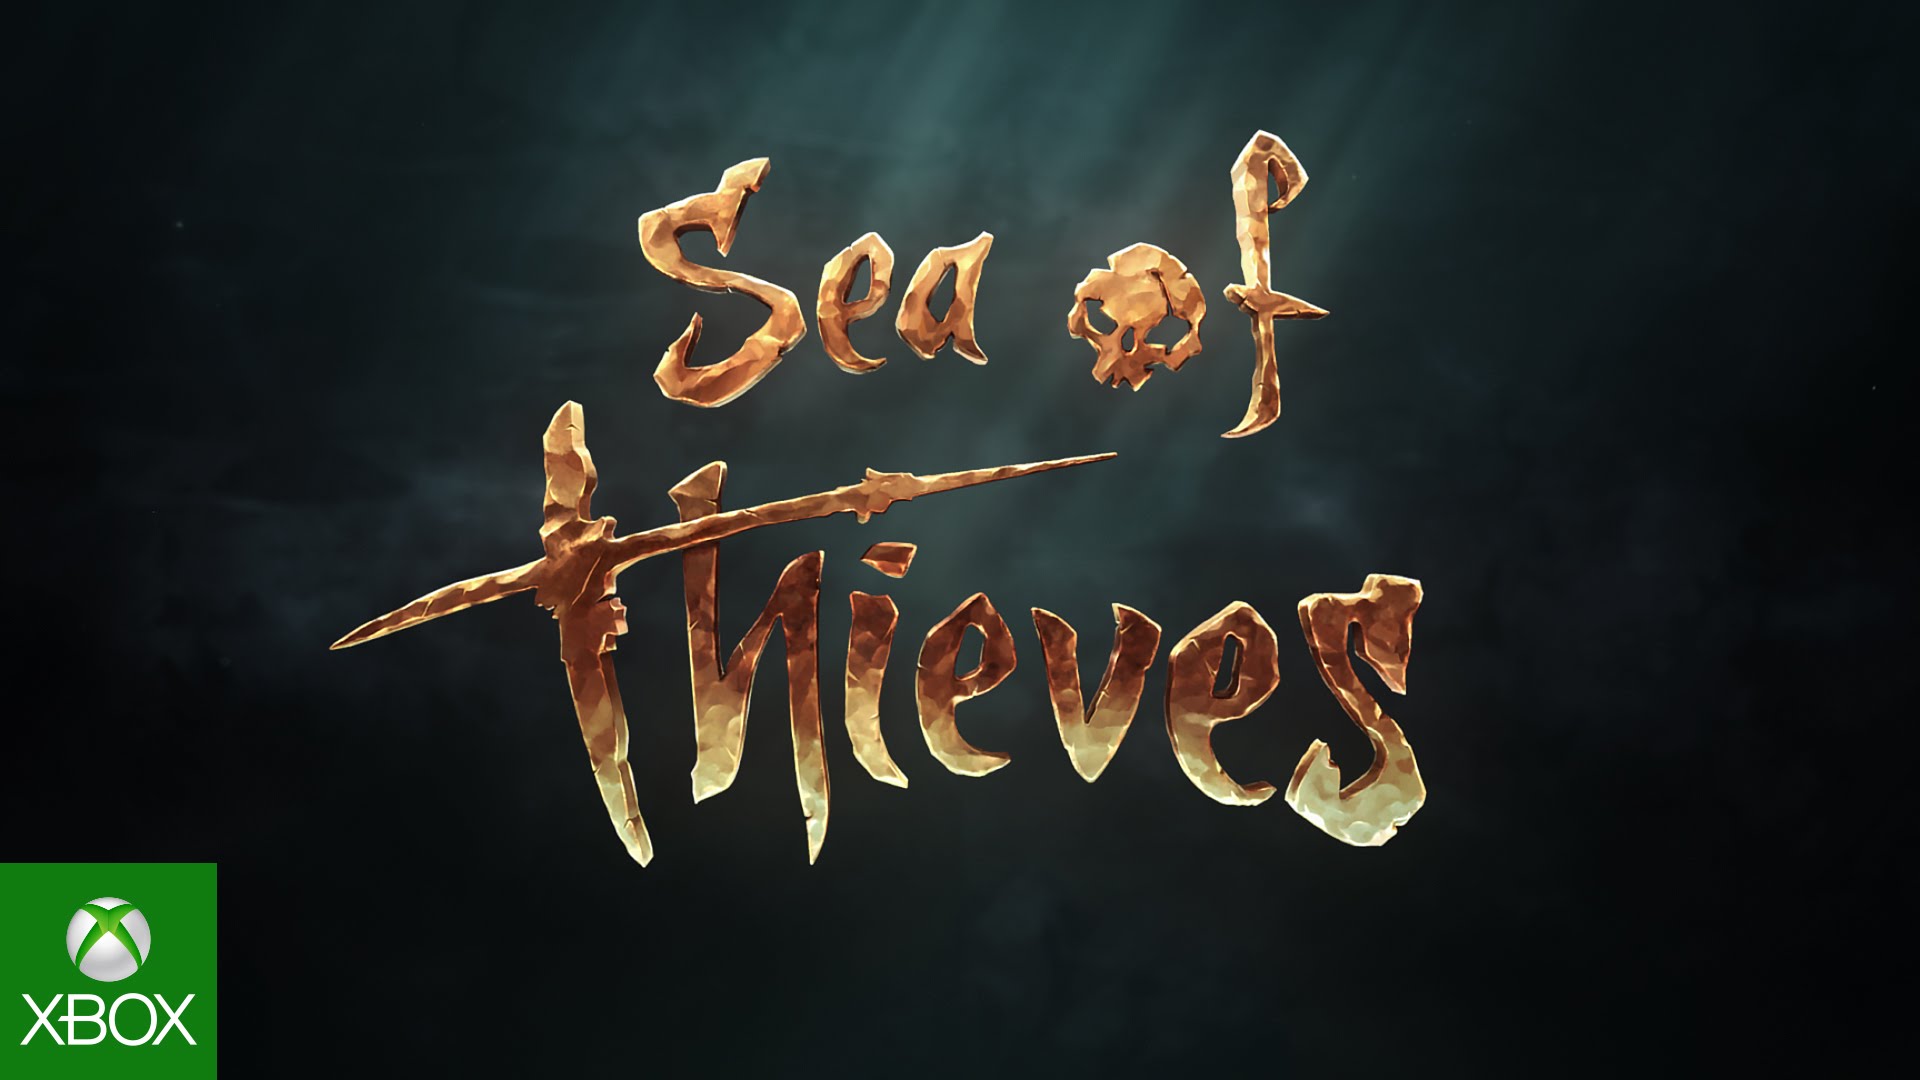 Sea Of Thieves Backgrounds on Wallpapers Vista